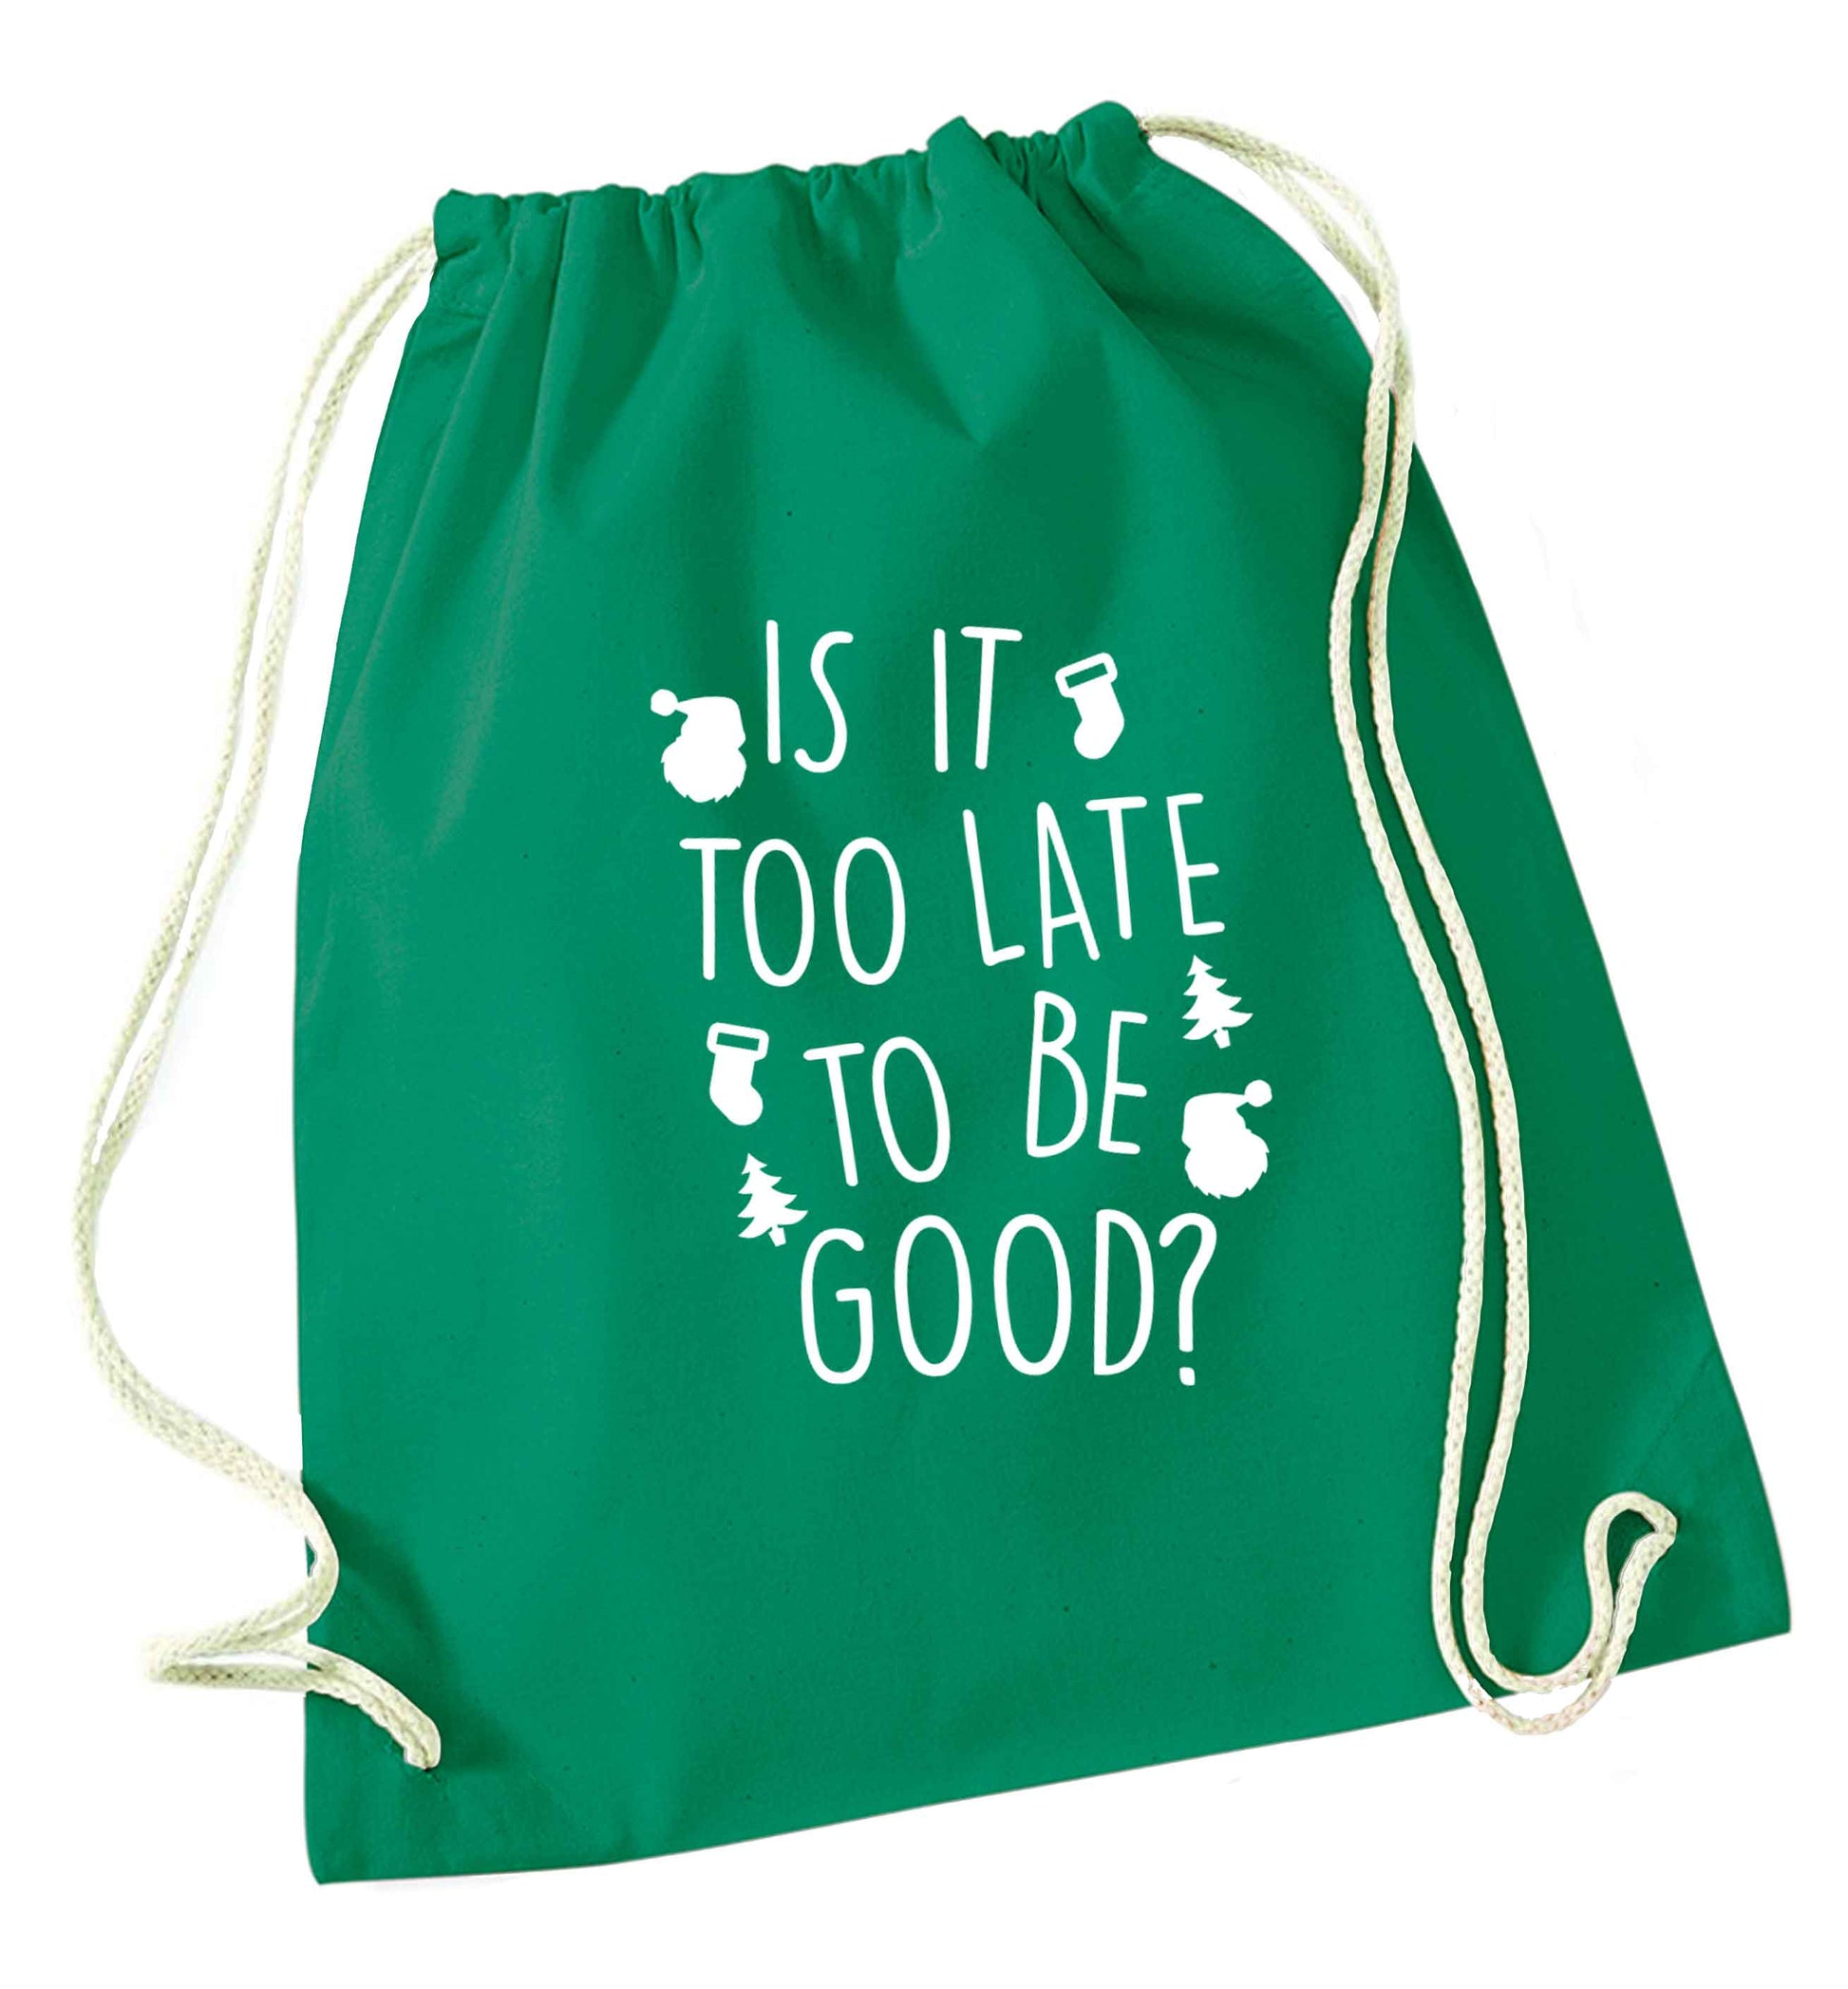 Too Late to be Good green drawstring bag